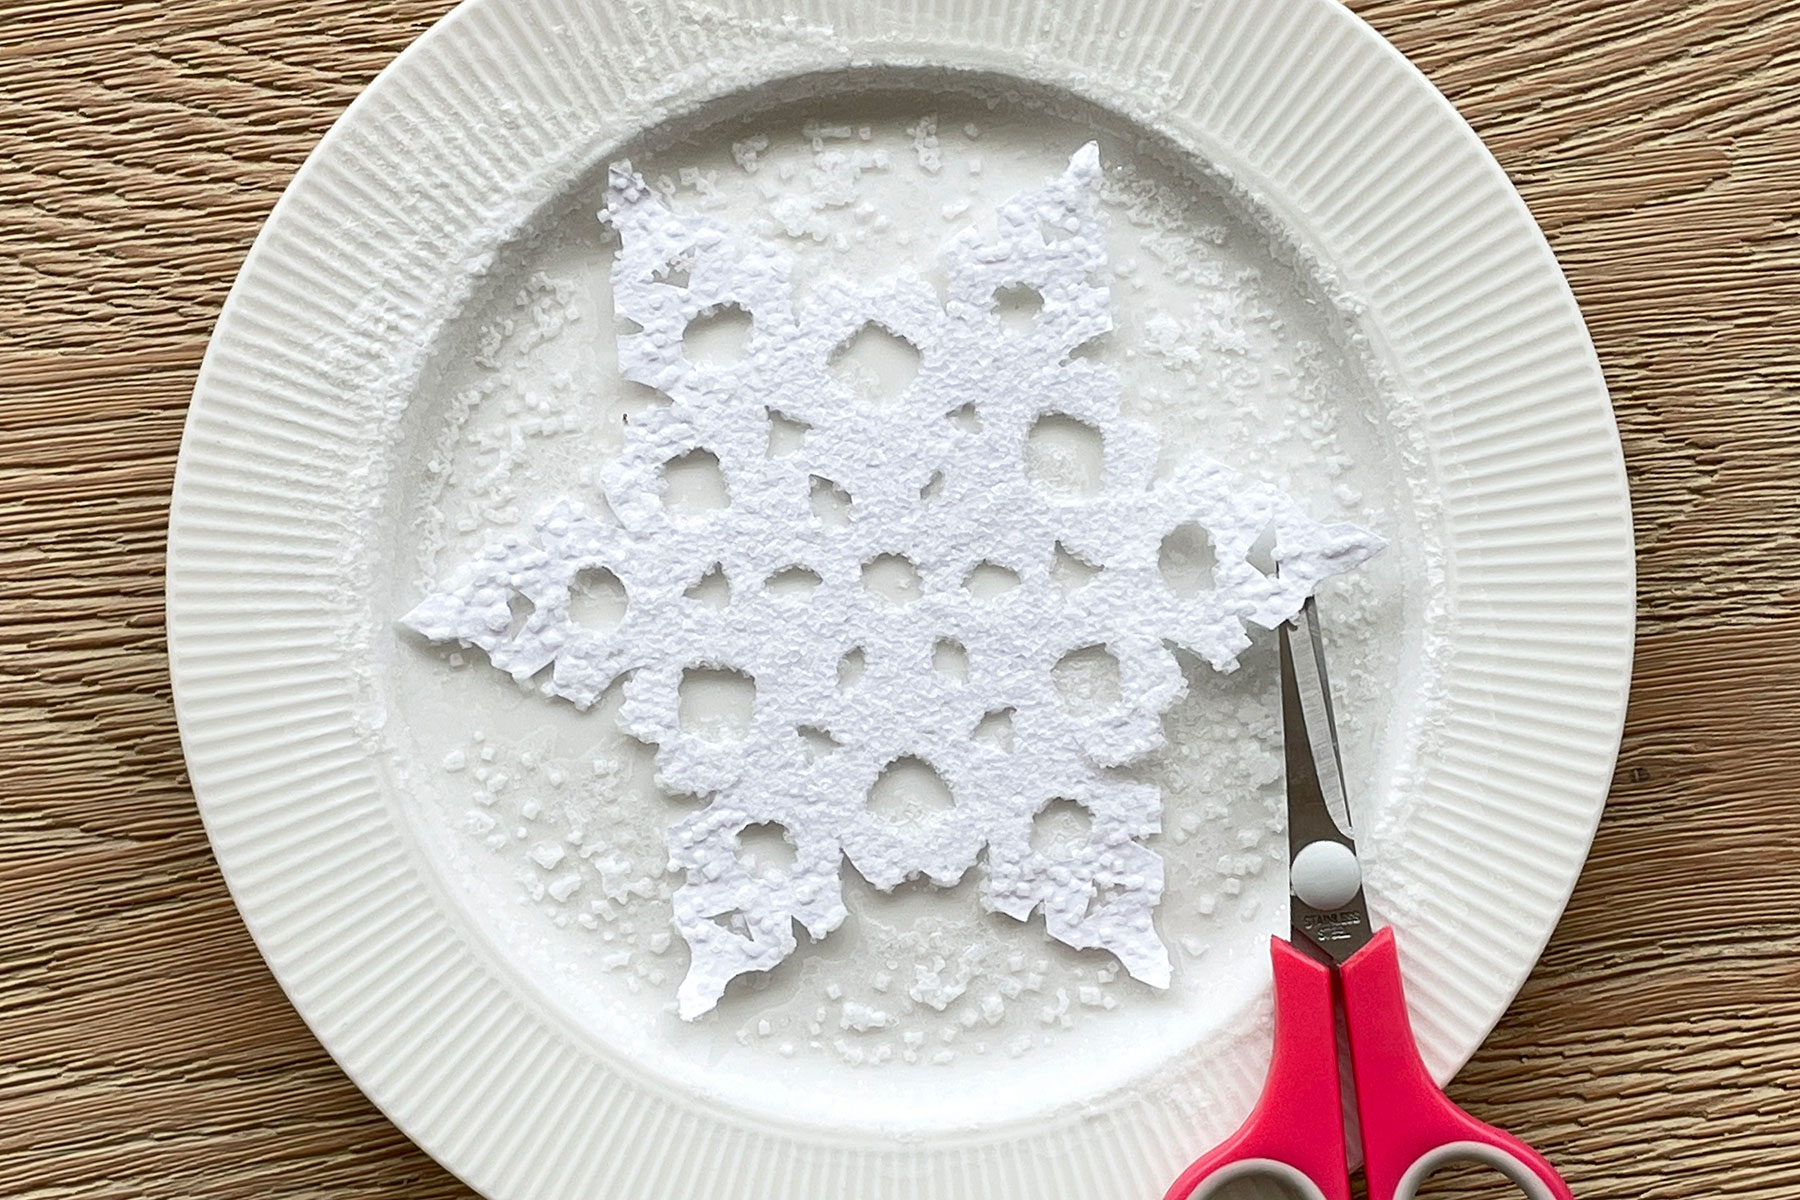 A photo of a paper snowflake on a plate, covered in salt crystals